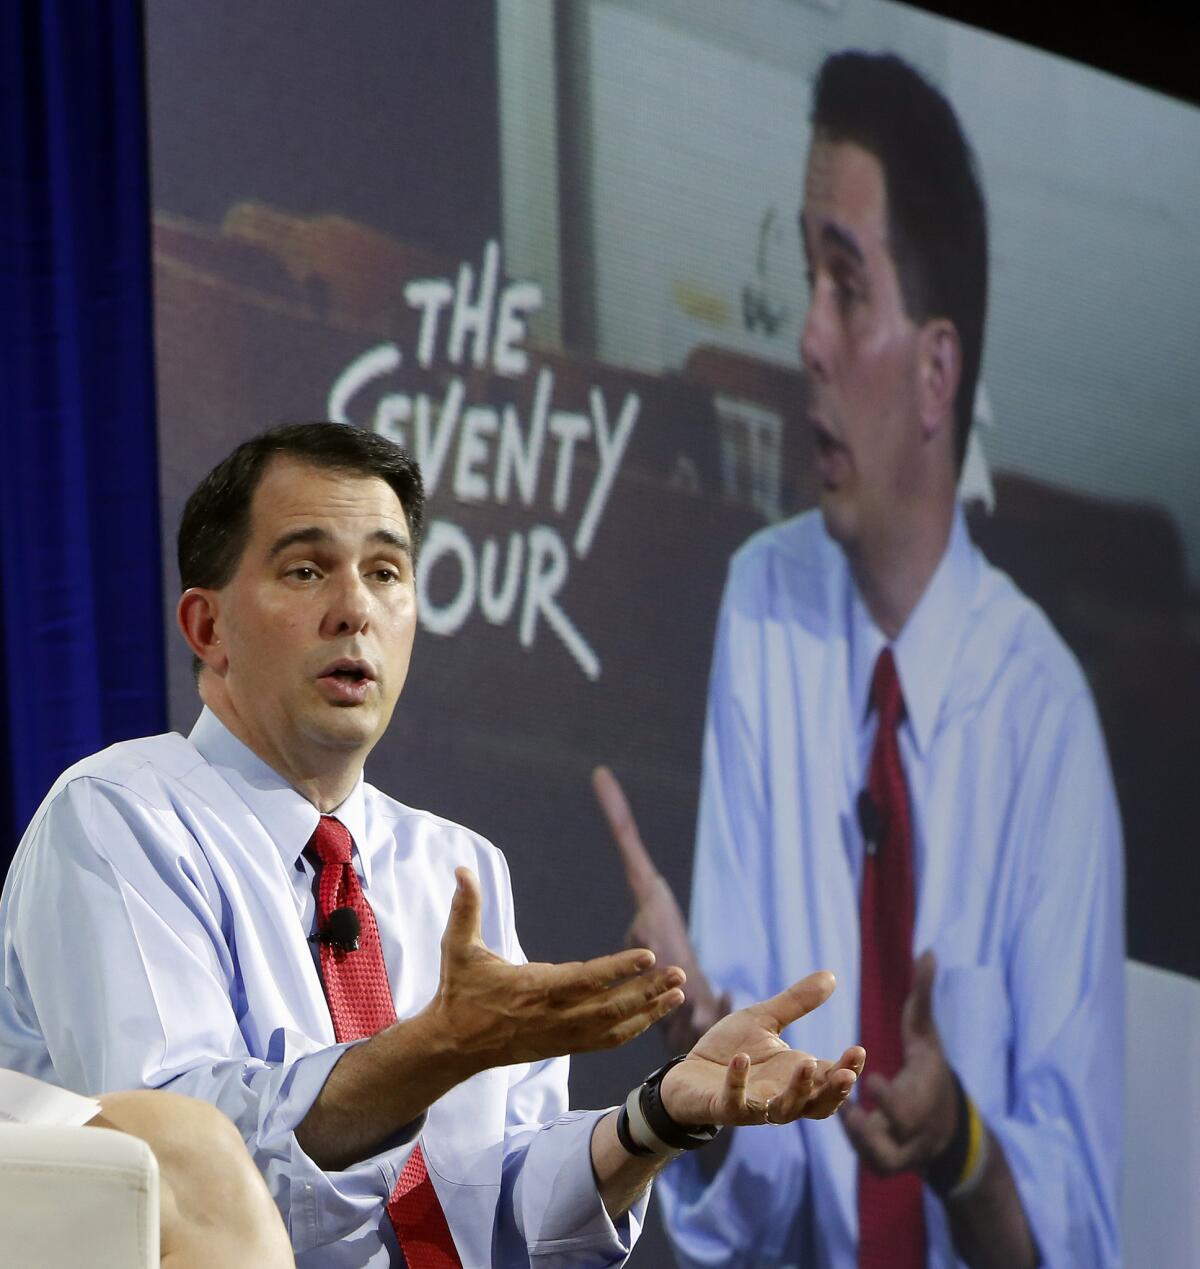 Wisconsin Gov. Scott Walker, who is vying for the GOP nomination for president, speaks during an education summit Wednesday in Londonderry, N.H.